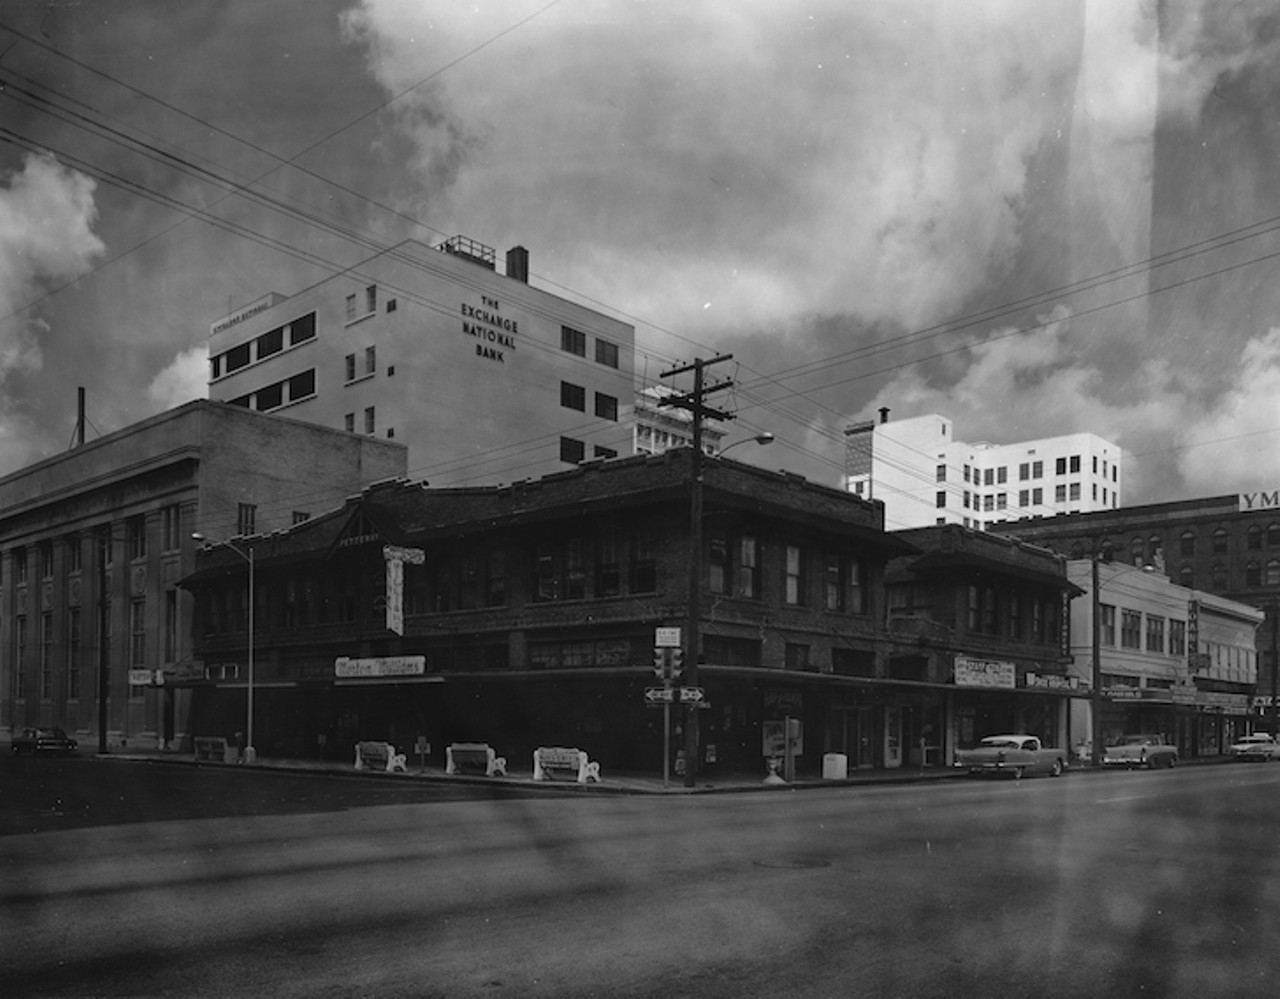 THEN
Morton Williams store and the Exchange National Bank
The Pettaway Building on the corner of Florida Avenue and Twiggs, home to the downtown location of Morton Williams, was constructed in 1912. The Tampa Furniture Company and The Tampa Photo and Art Supply Company were the first tenants. This Burgert photo is untitled and undated but was most likely taken in the early 1960s given the model of the cars and Tampa Coin Exchange in the image. It is another example of a photo in the collection missing the typical Burgert quality and signature.